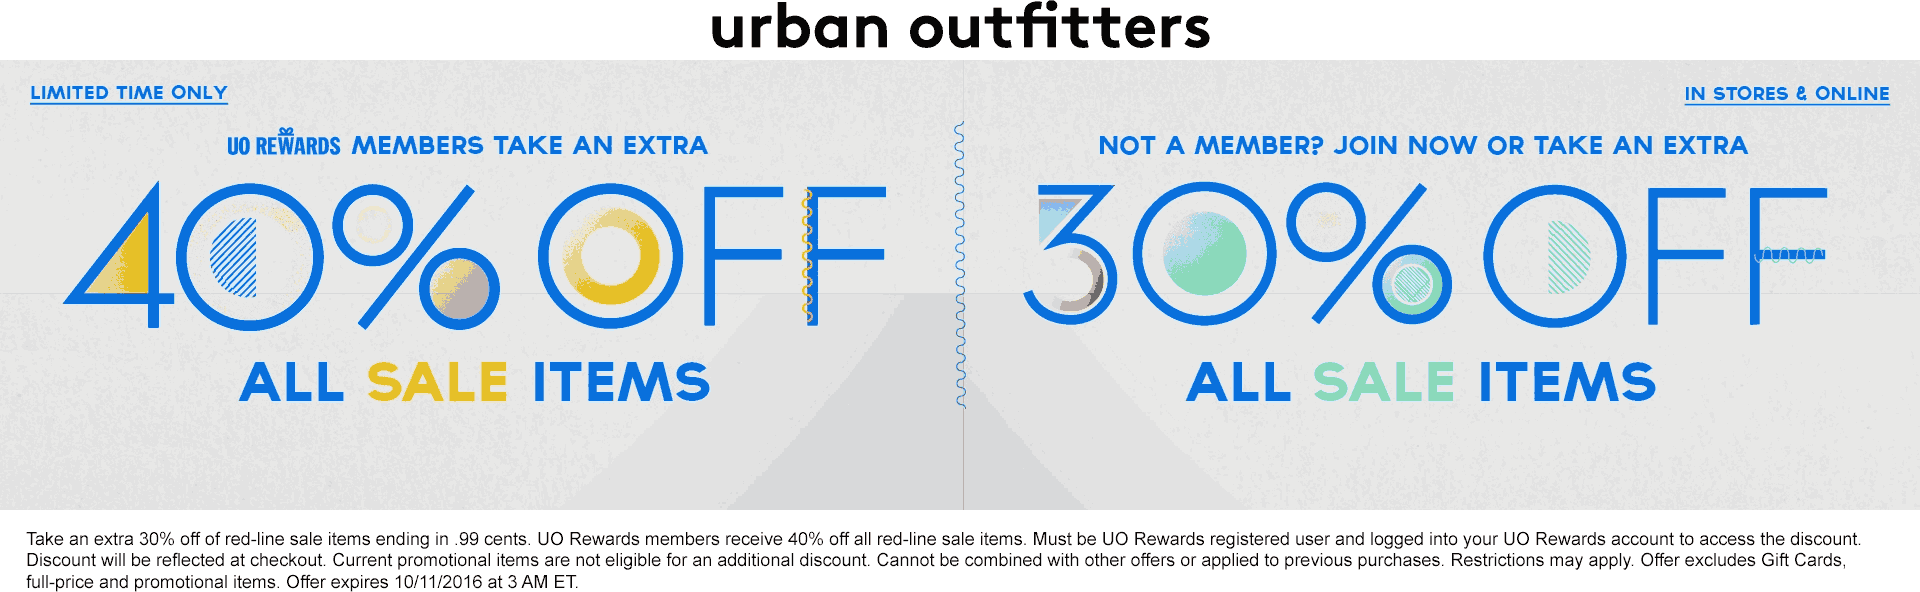 October 2016 280 Urban Outfitters Coupon 4867 